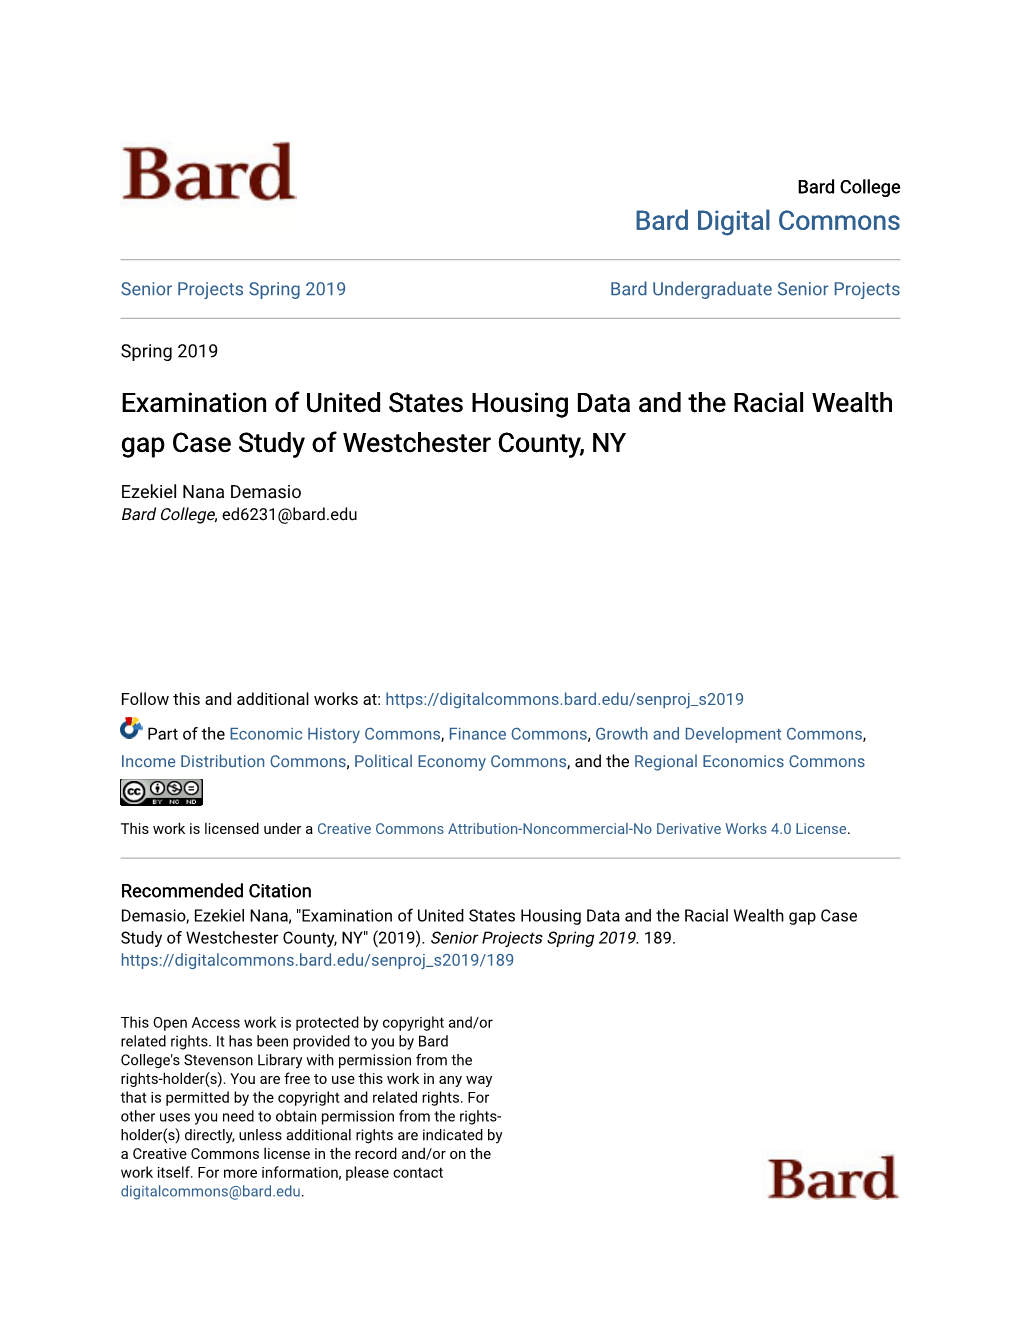 Examination of United States Housing Data and the Racial Wealth Gap Case Study of Westchester County, NY